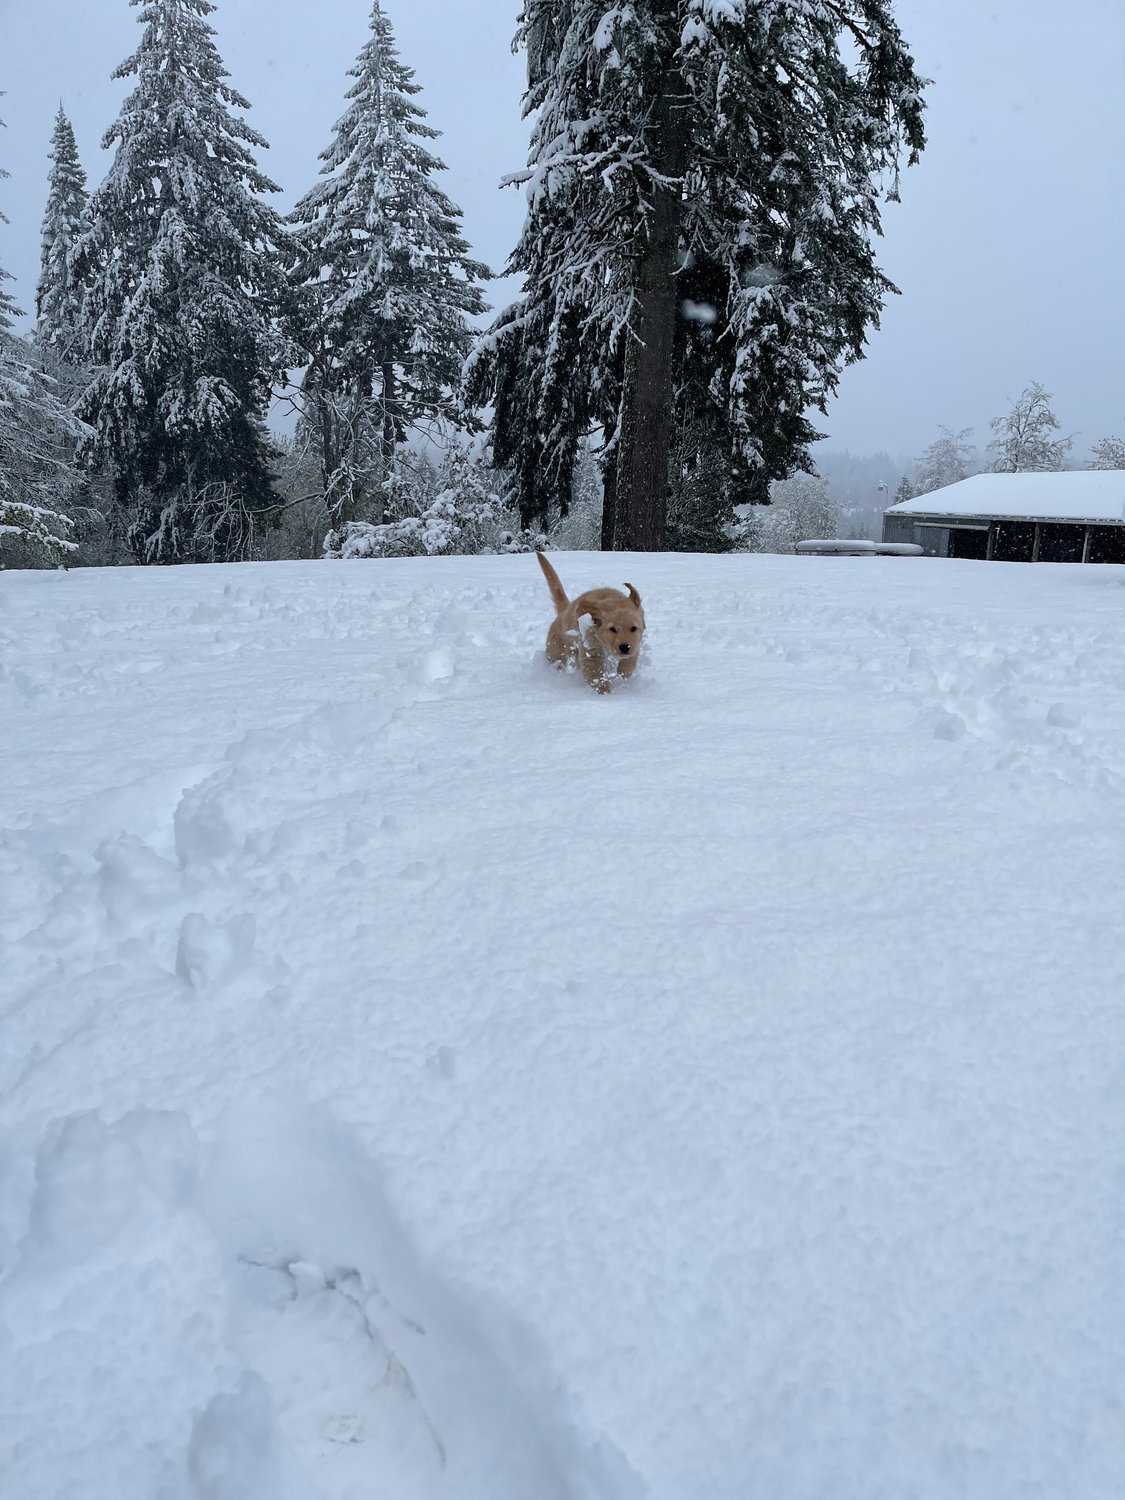 Boone plays in the snow in this photo submitted by Hayden Humphrey.